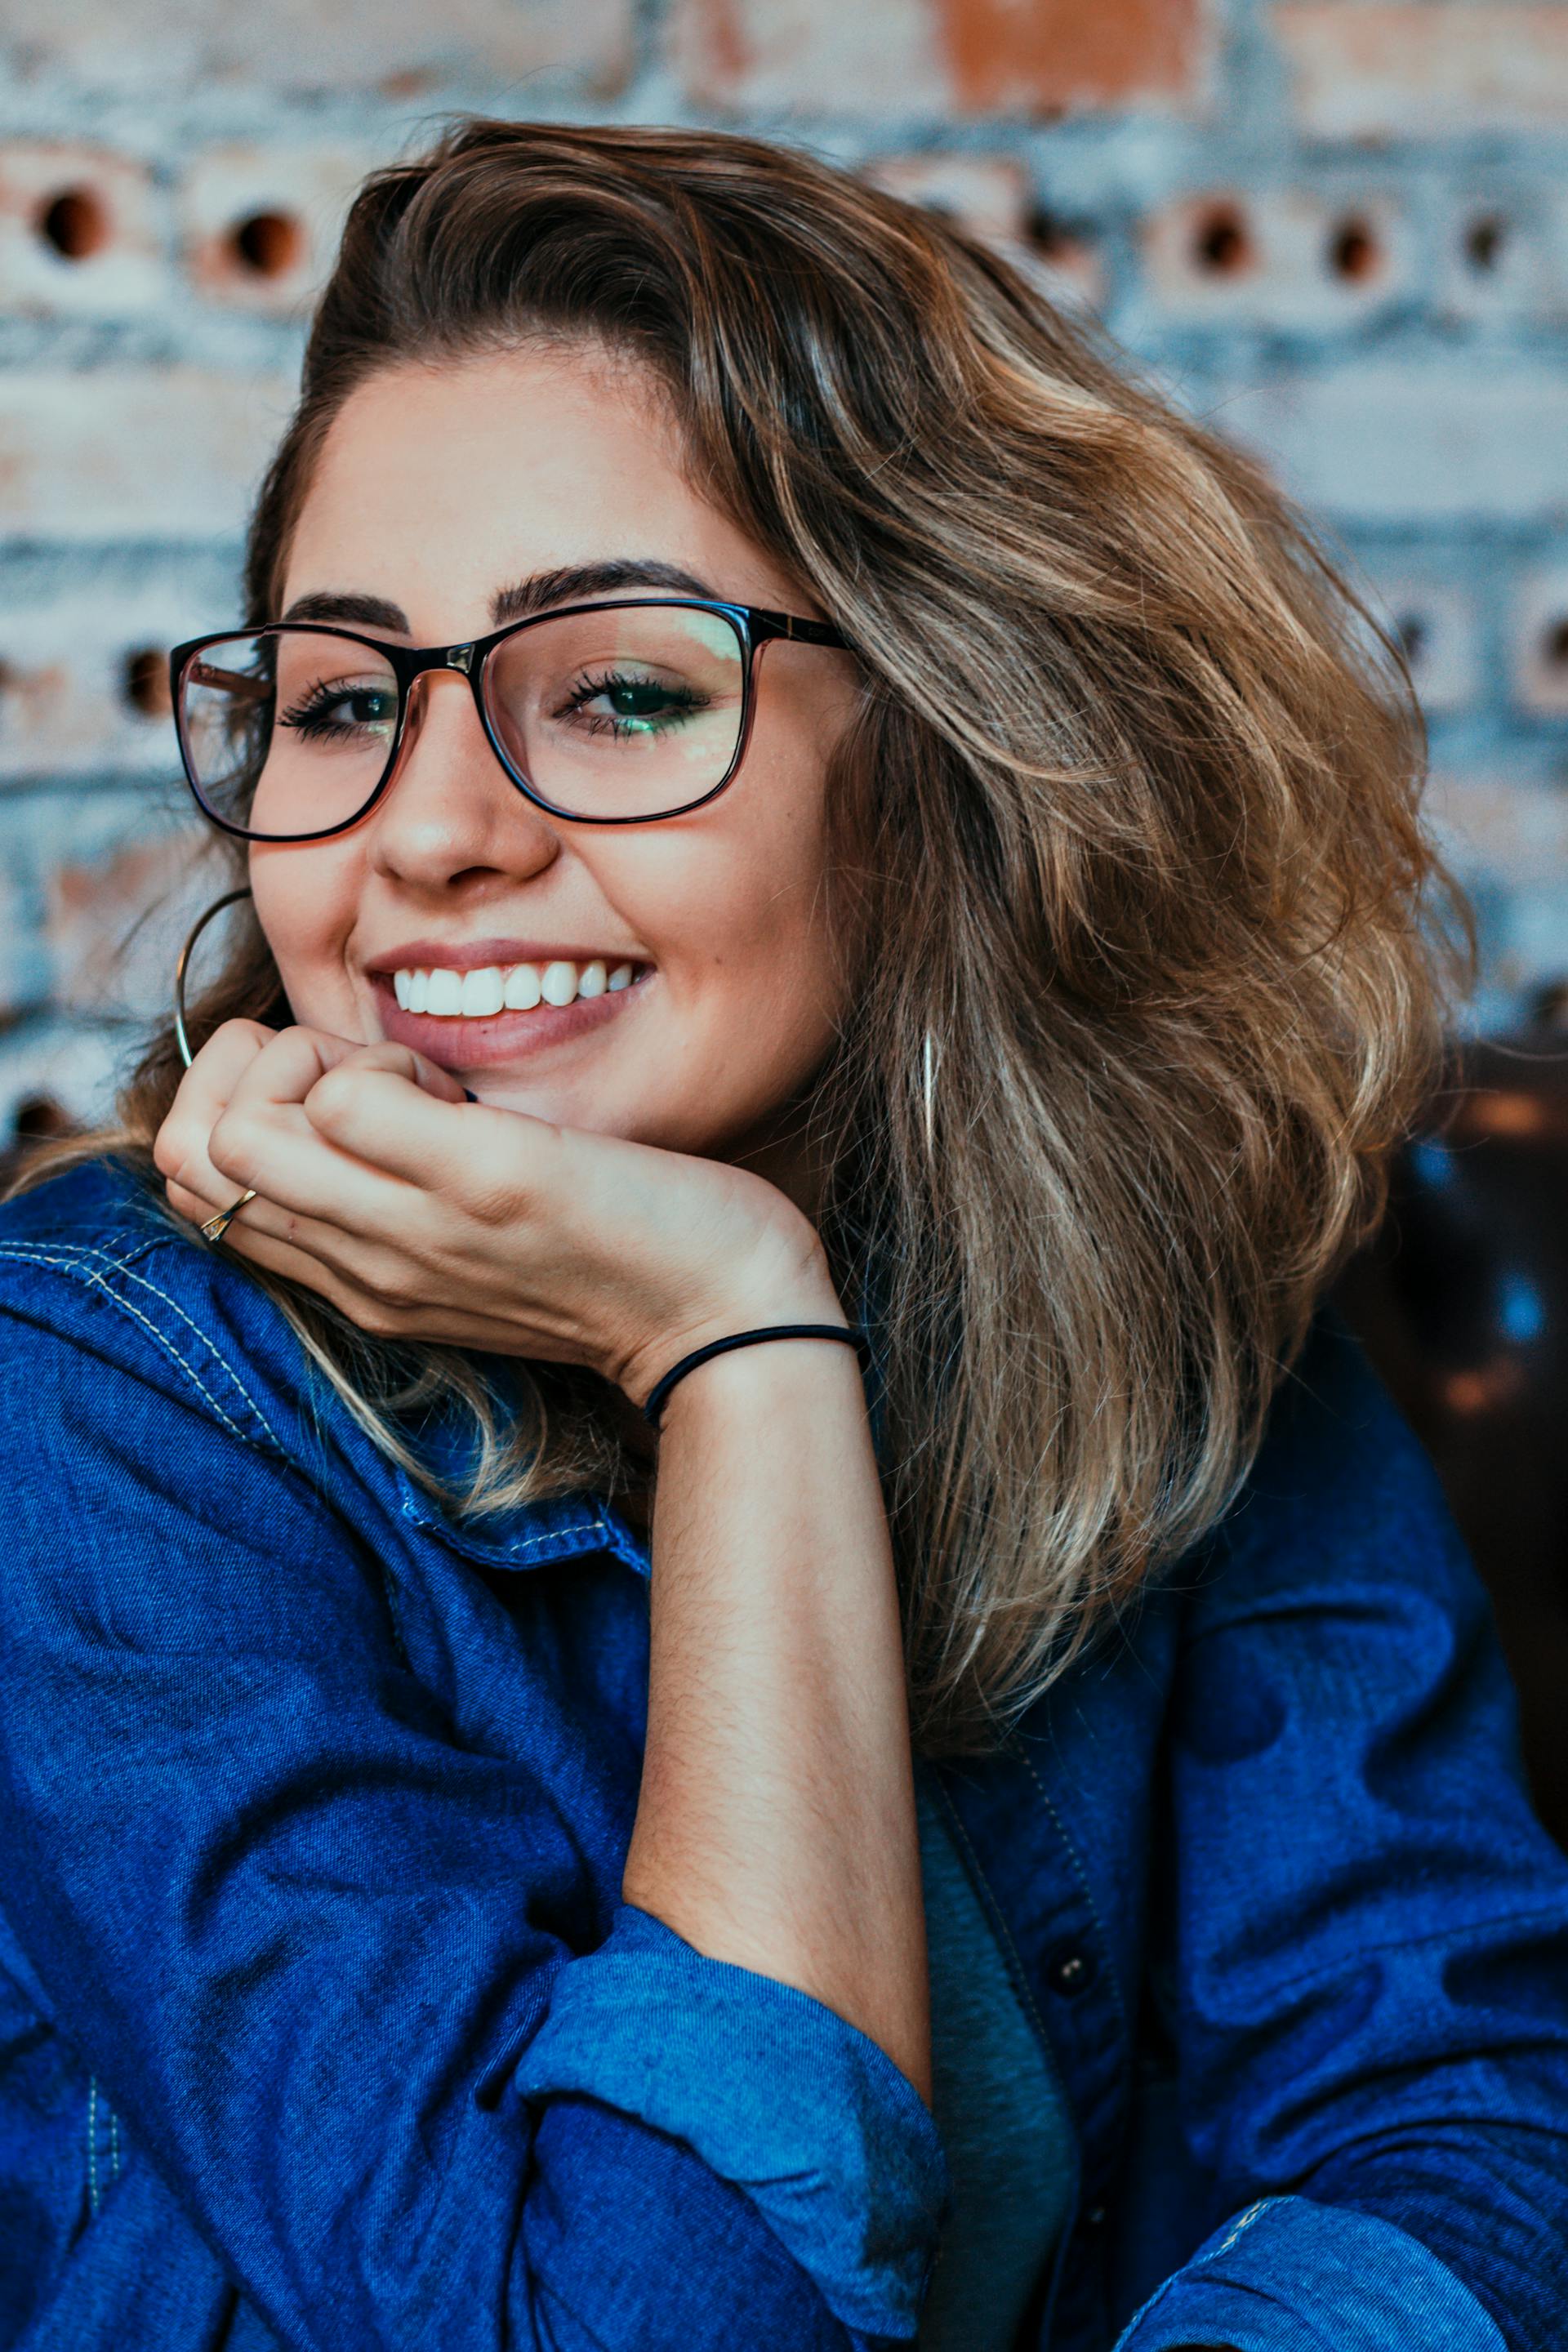 A smiling young woman | Source: Pexels